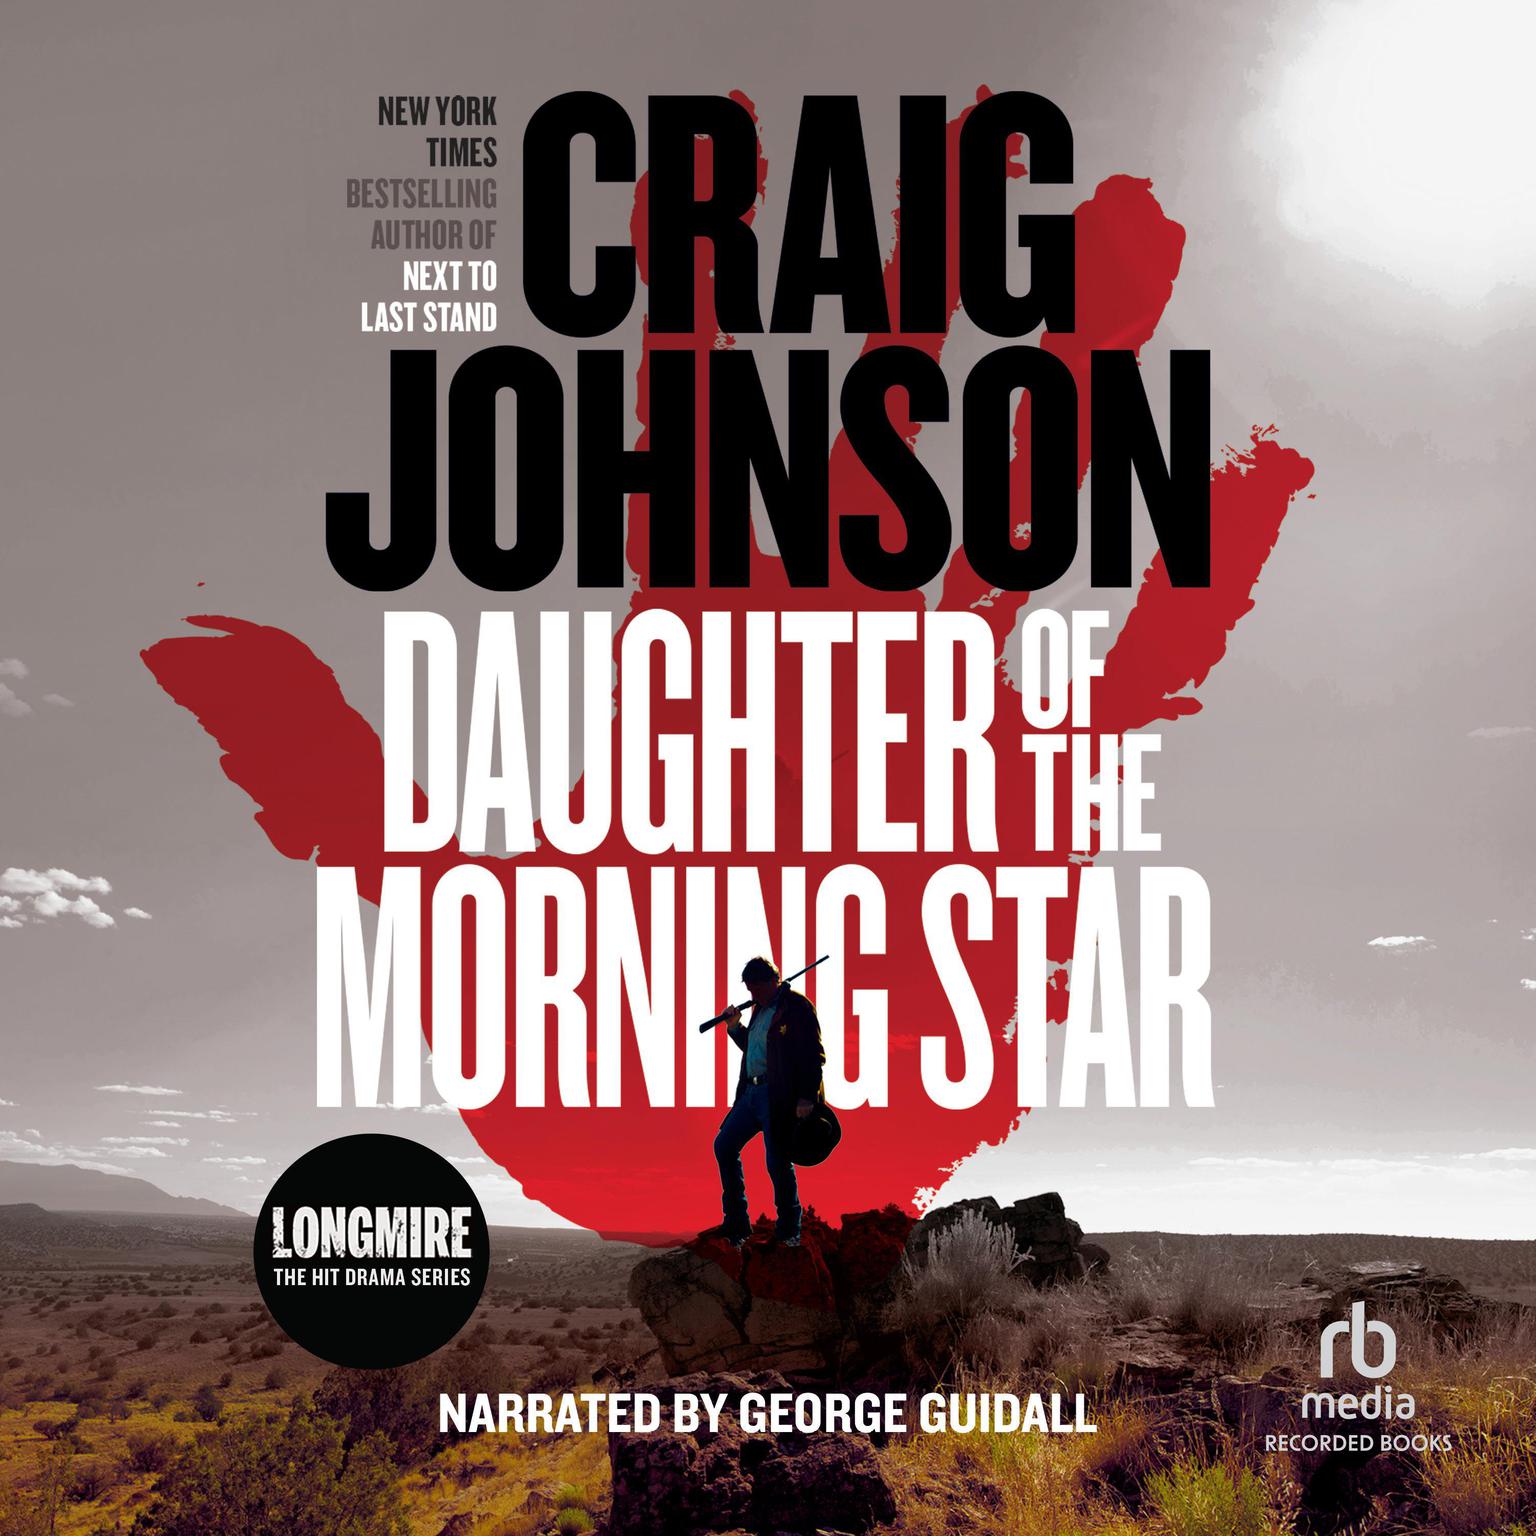 Daughter of the Morning Star: A Longmire Mystery Audiobook, by Craig Johnson